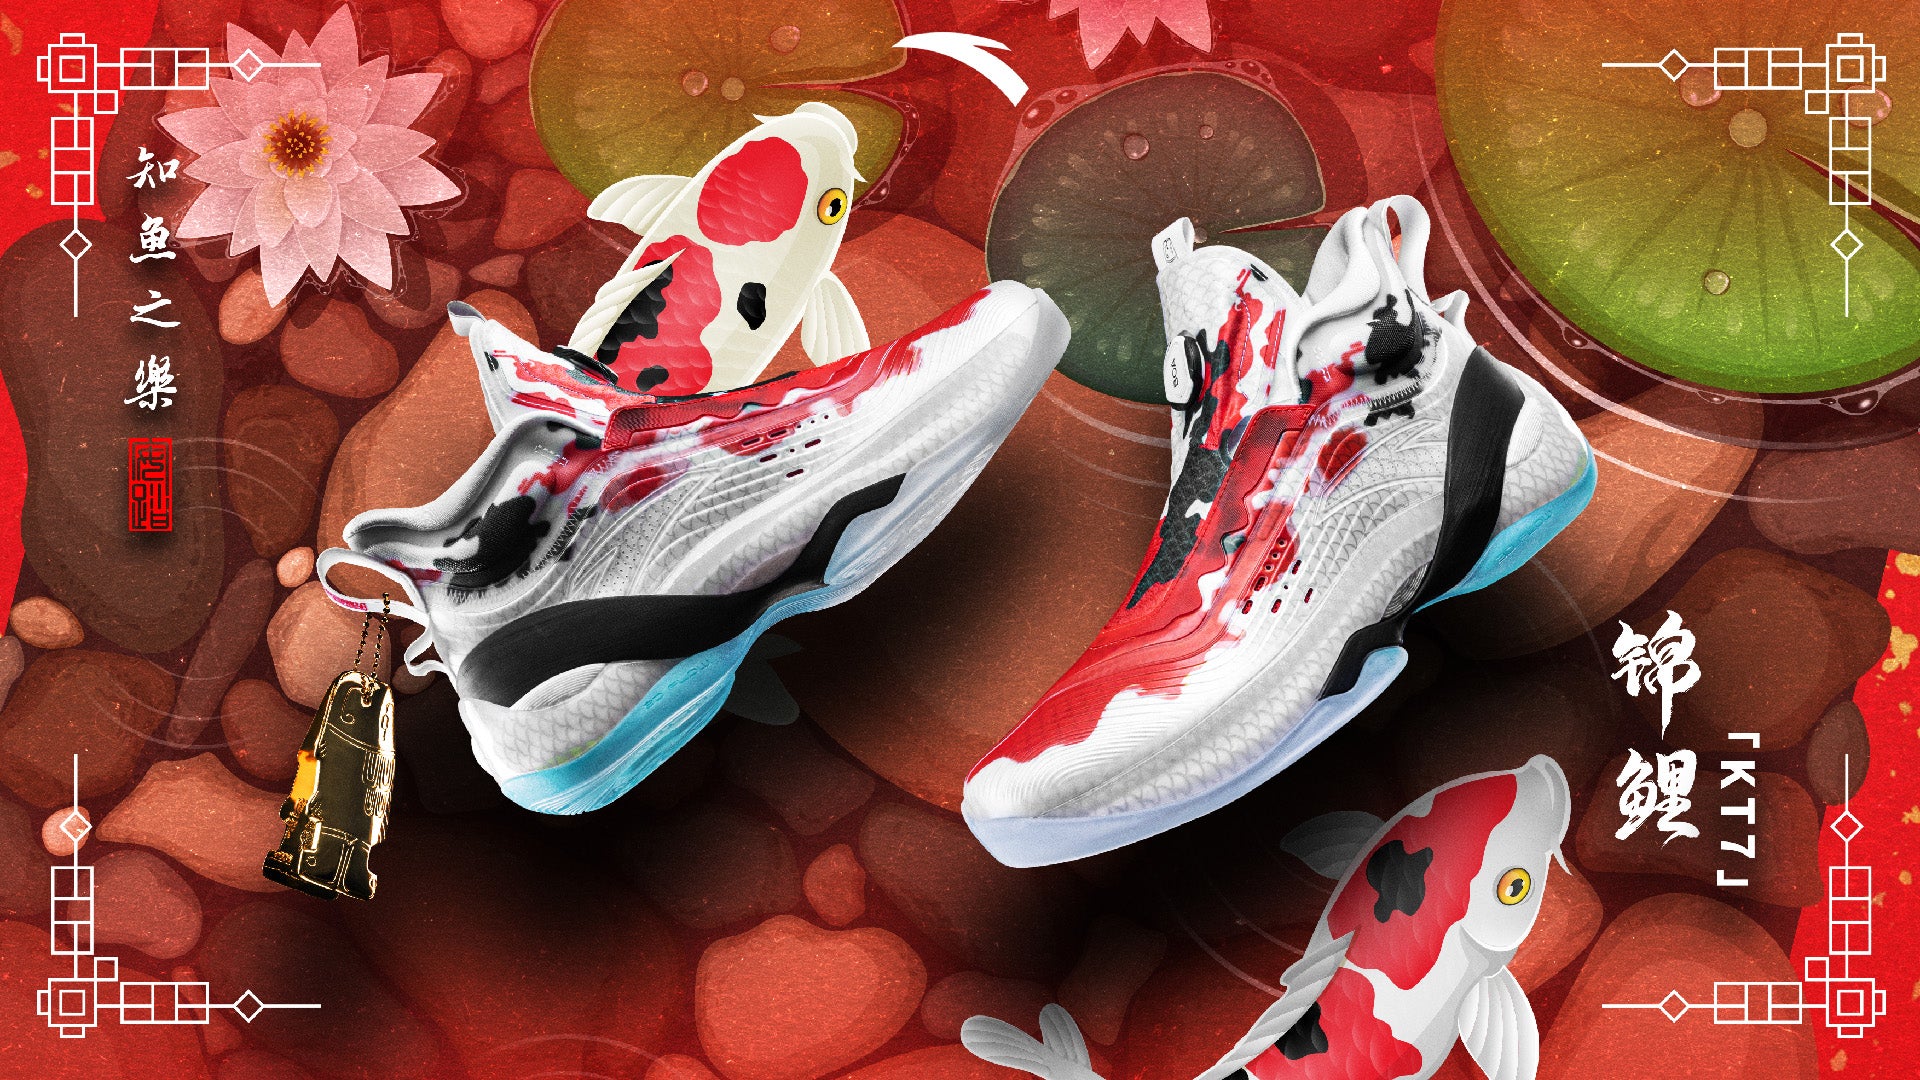 Basketball shoes designed to look like red/white/black koi fish, against a background of lily pads.